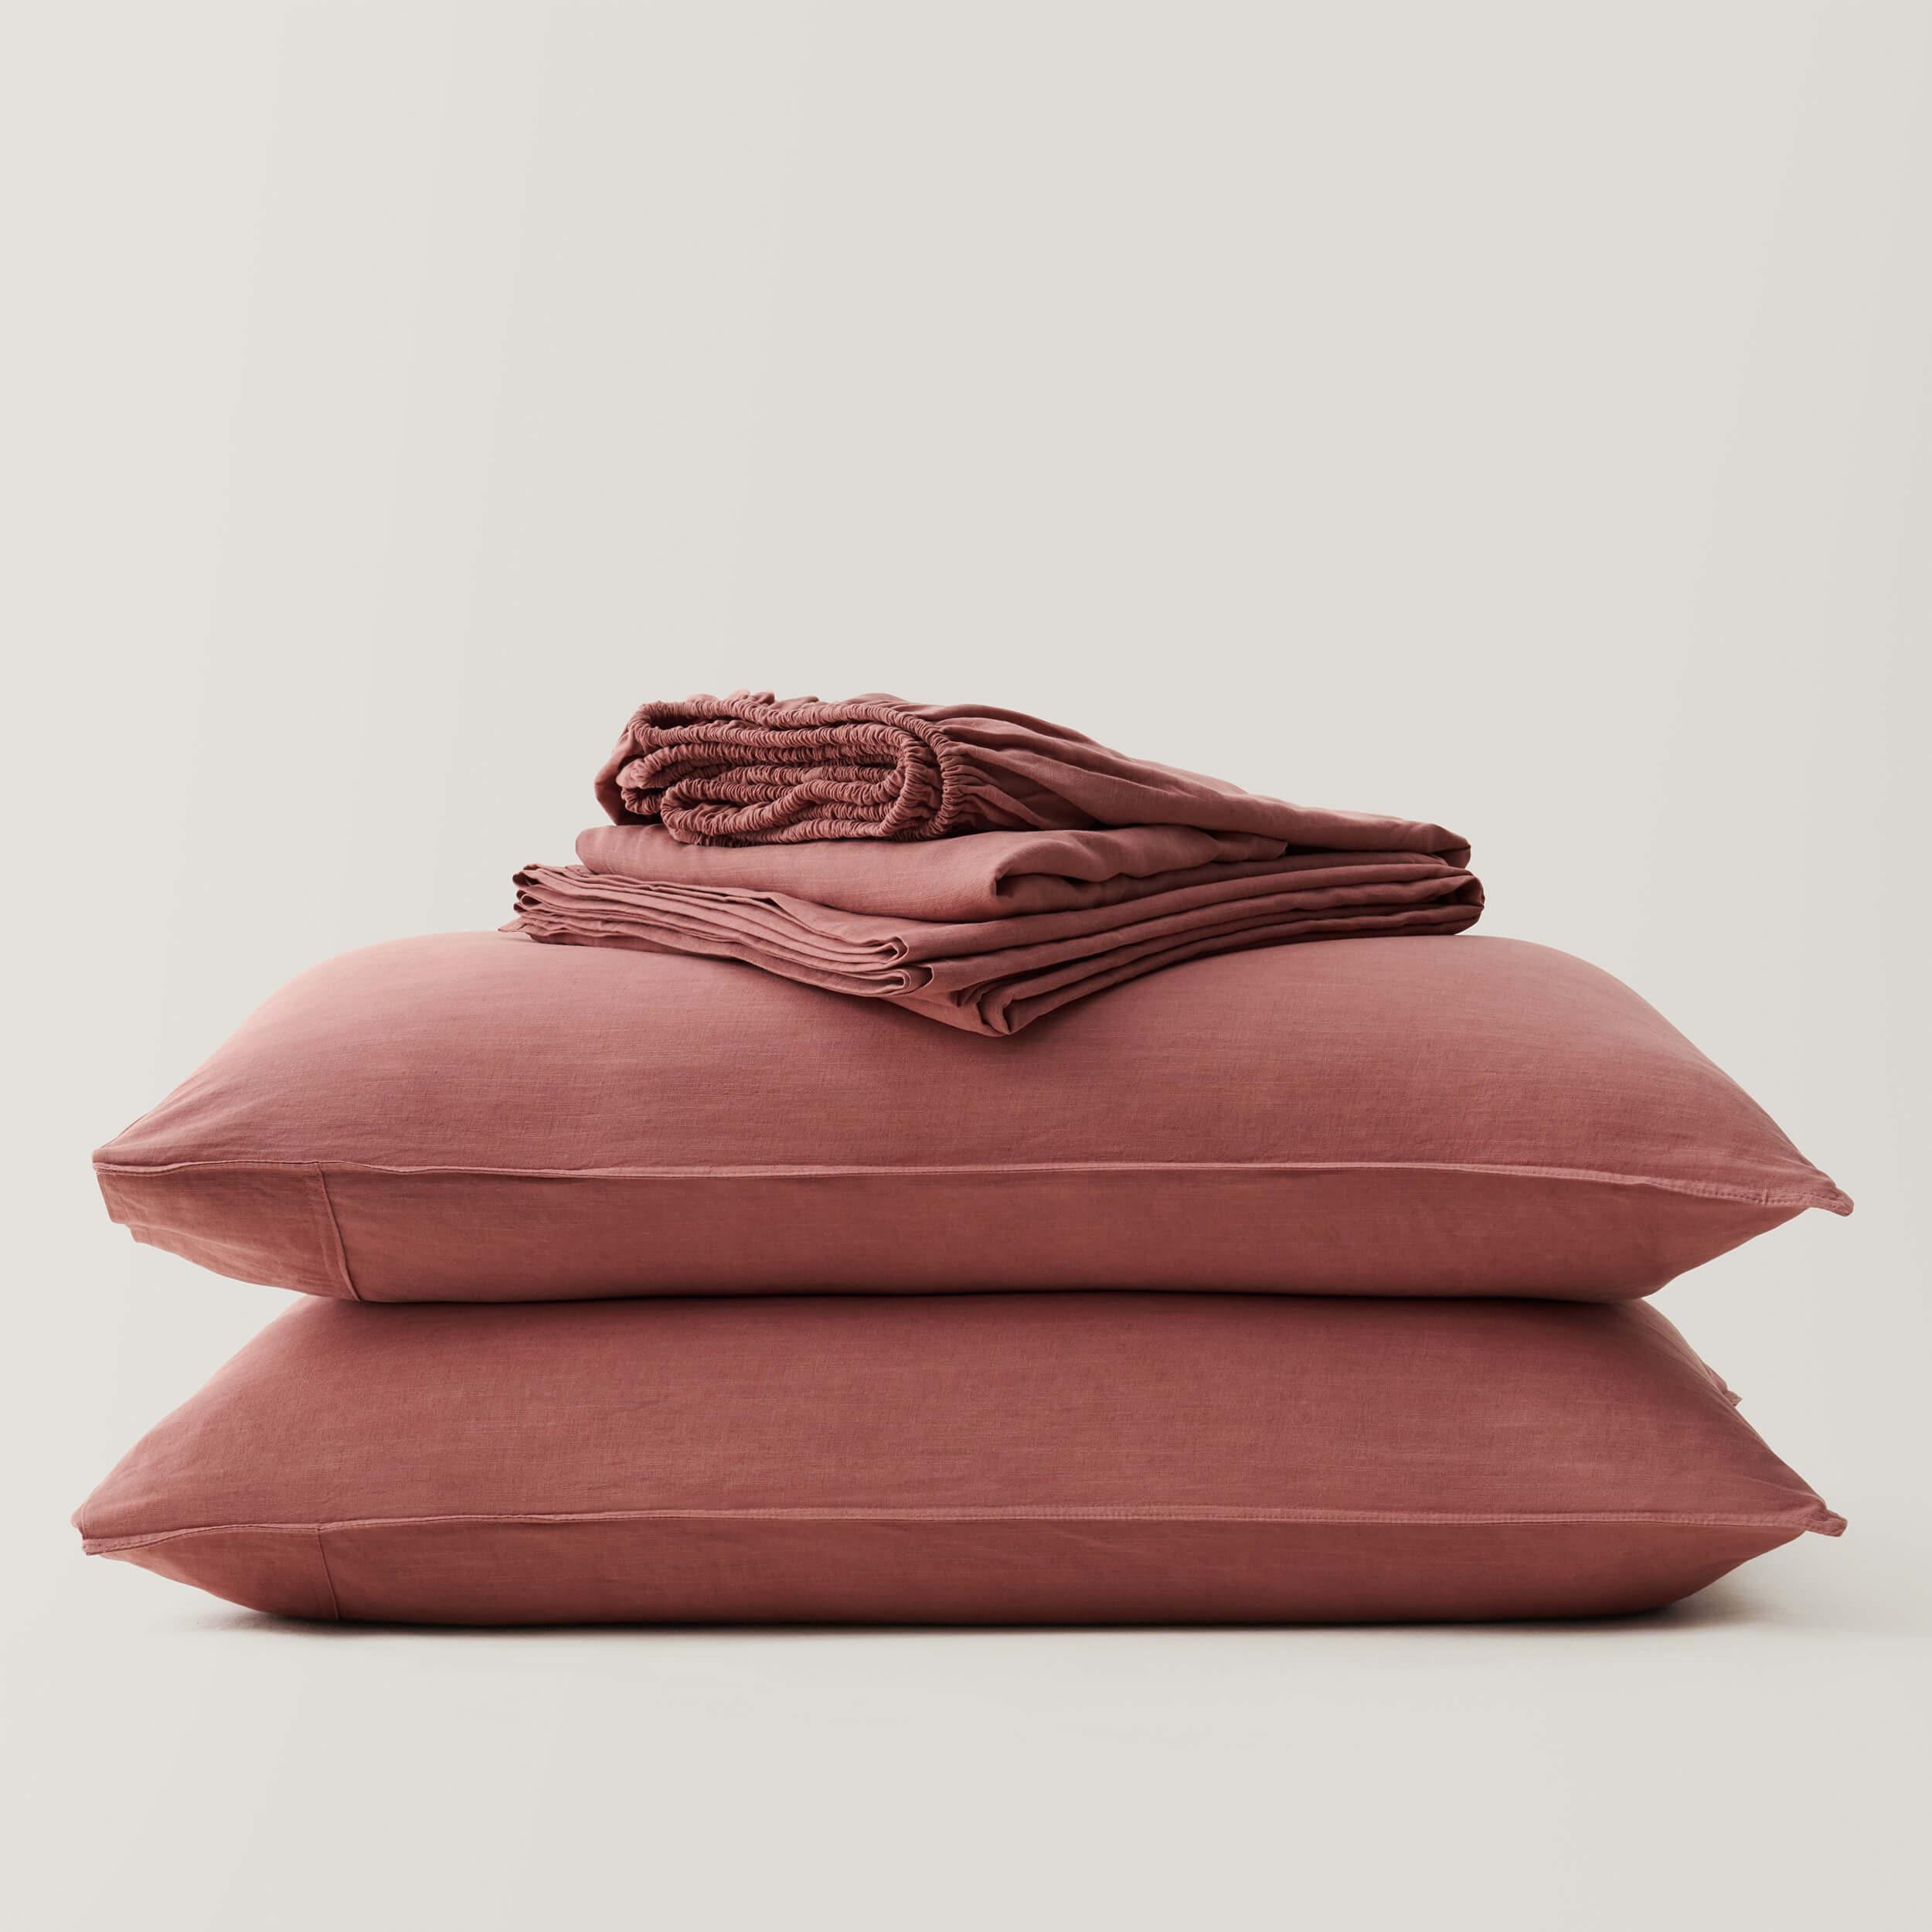 Wrap yourself in the softness of Linen Lyocell Sheet Set designed specifically for king-sized mattresses.